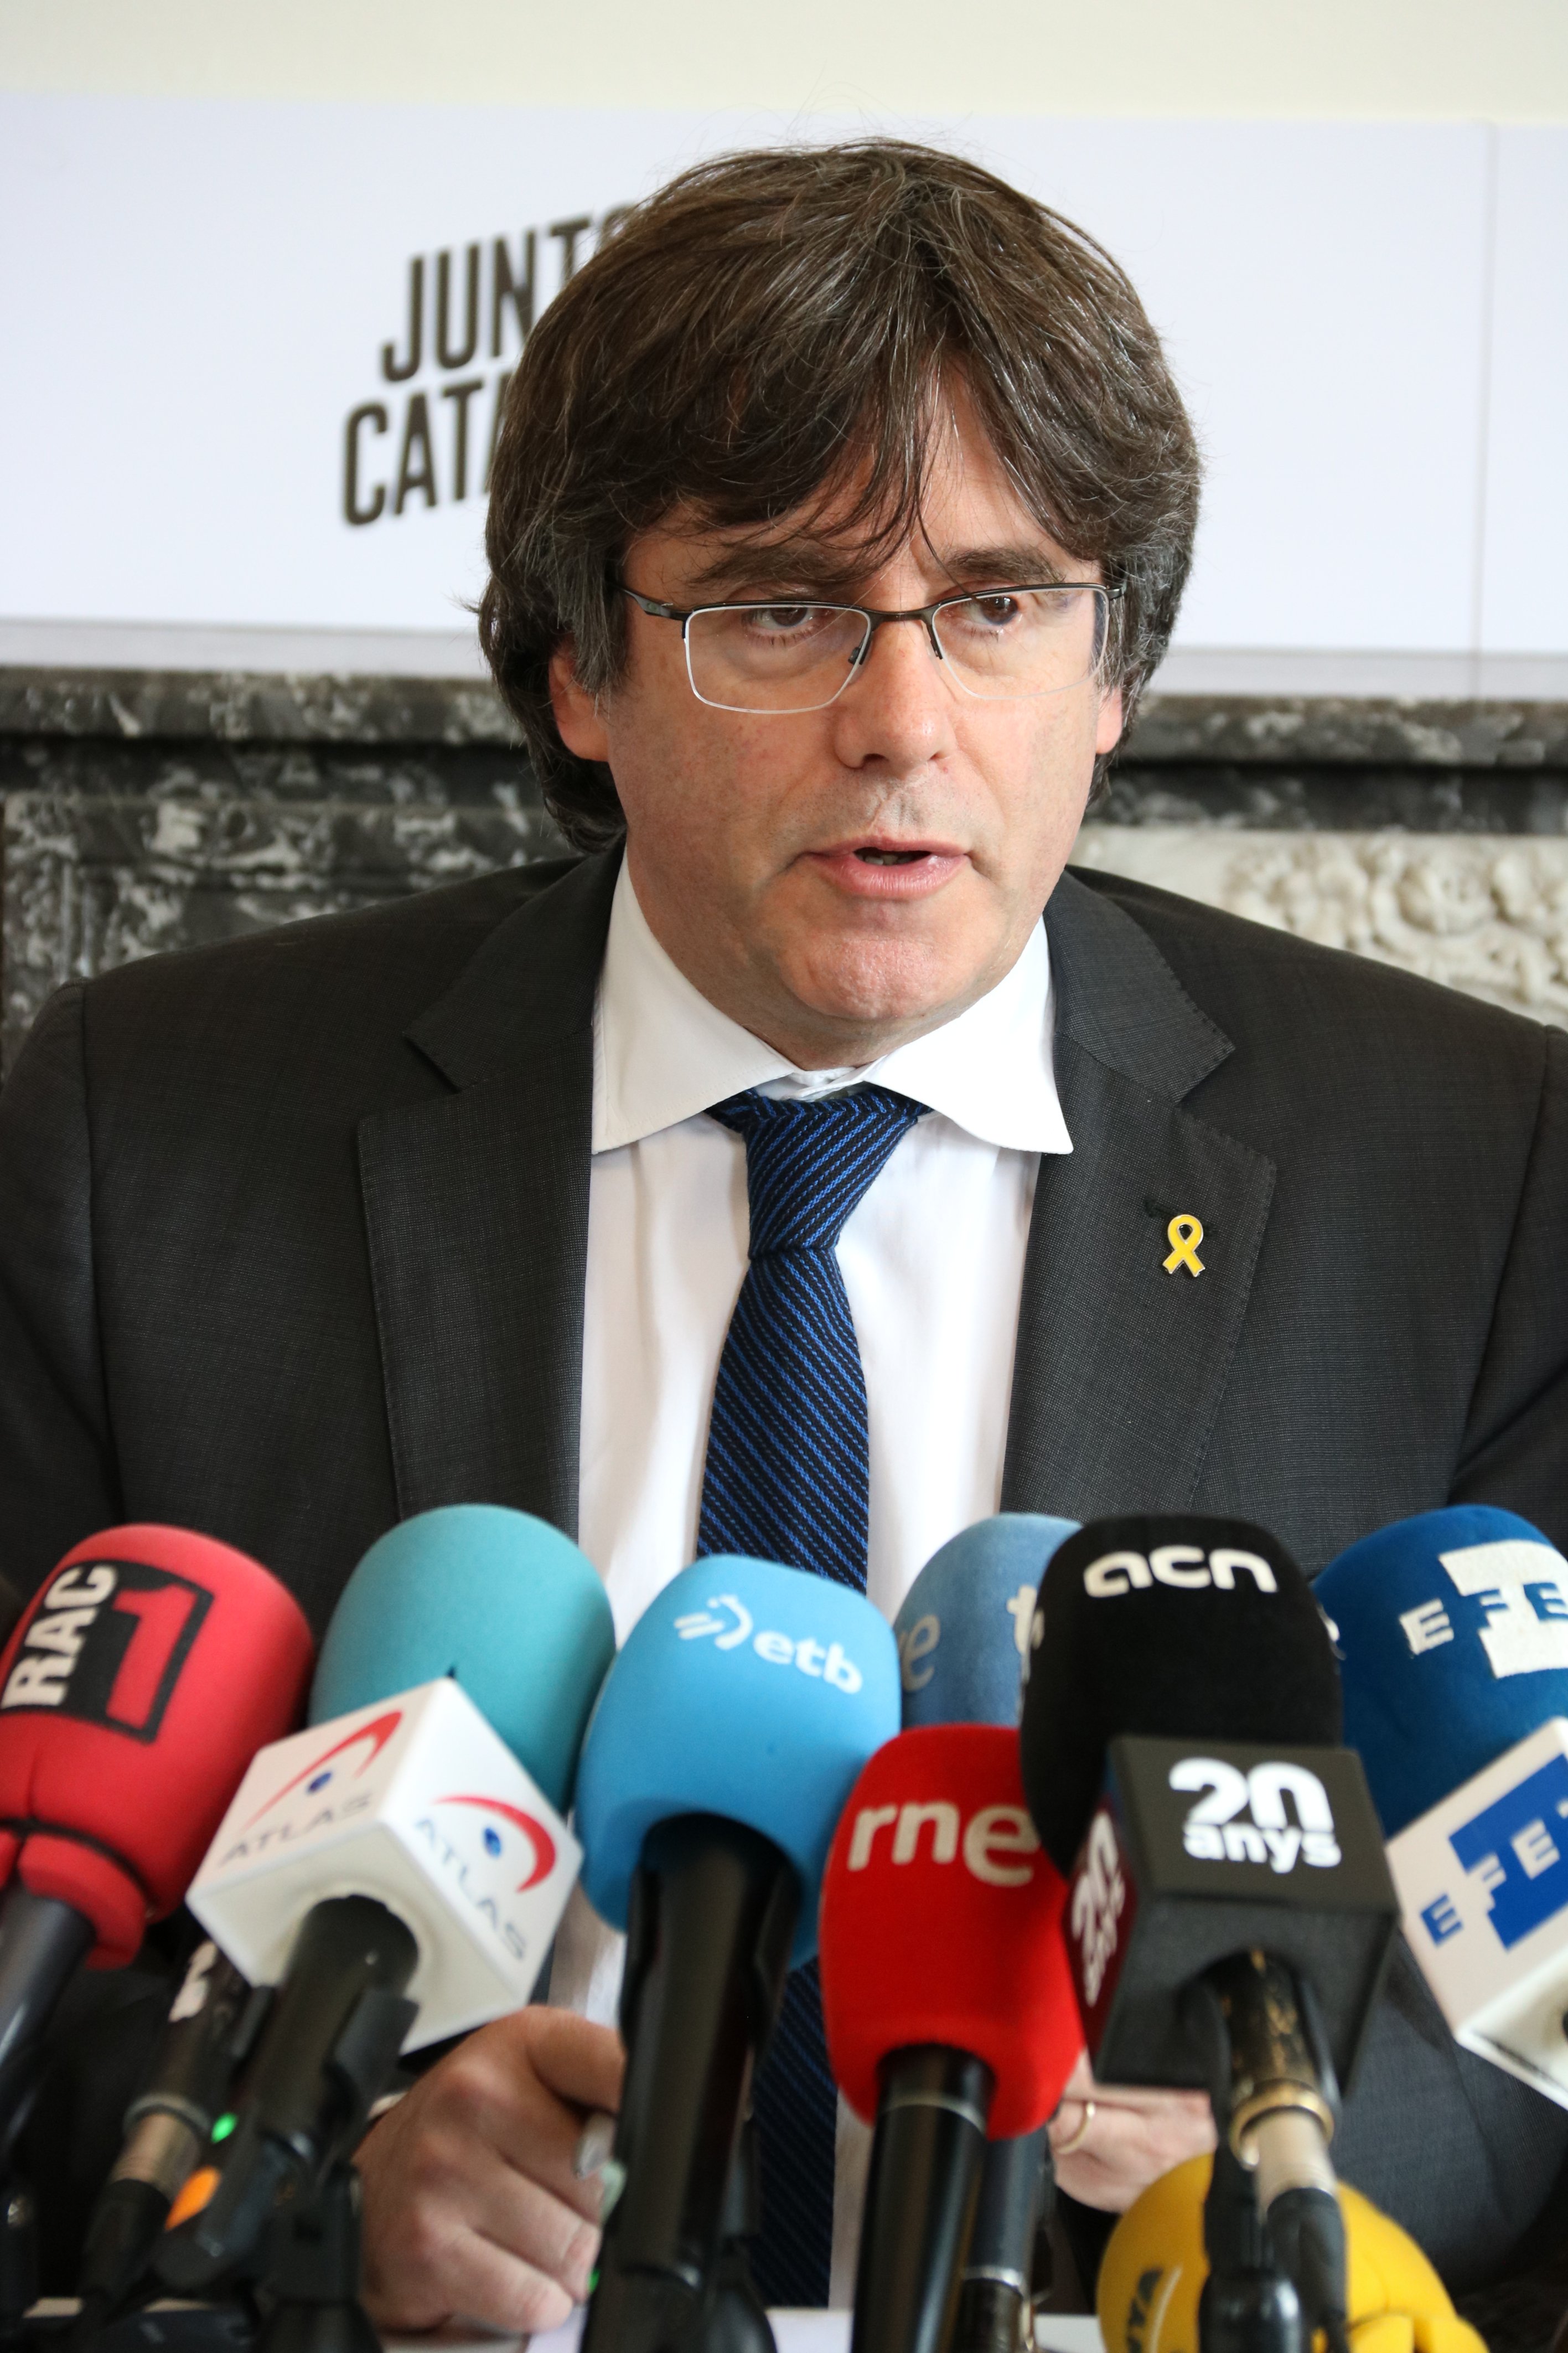 Puigdemont to take legal action against Spain's Electoral Commission